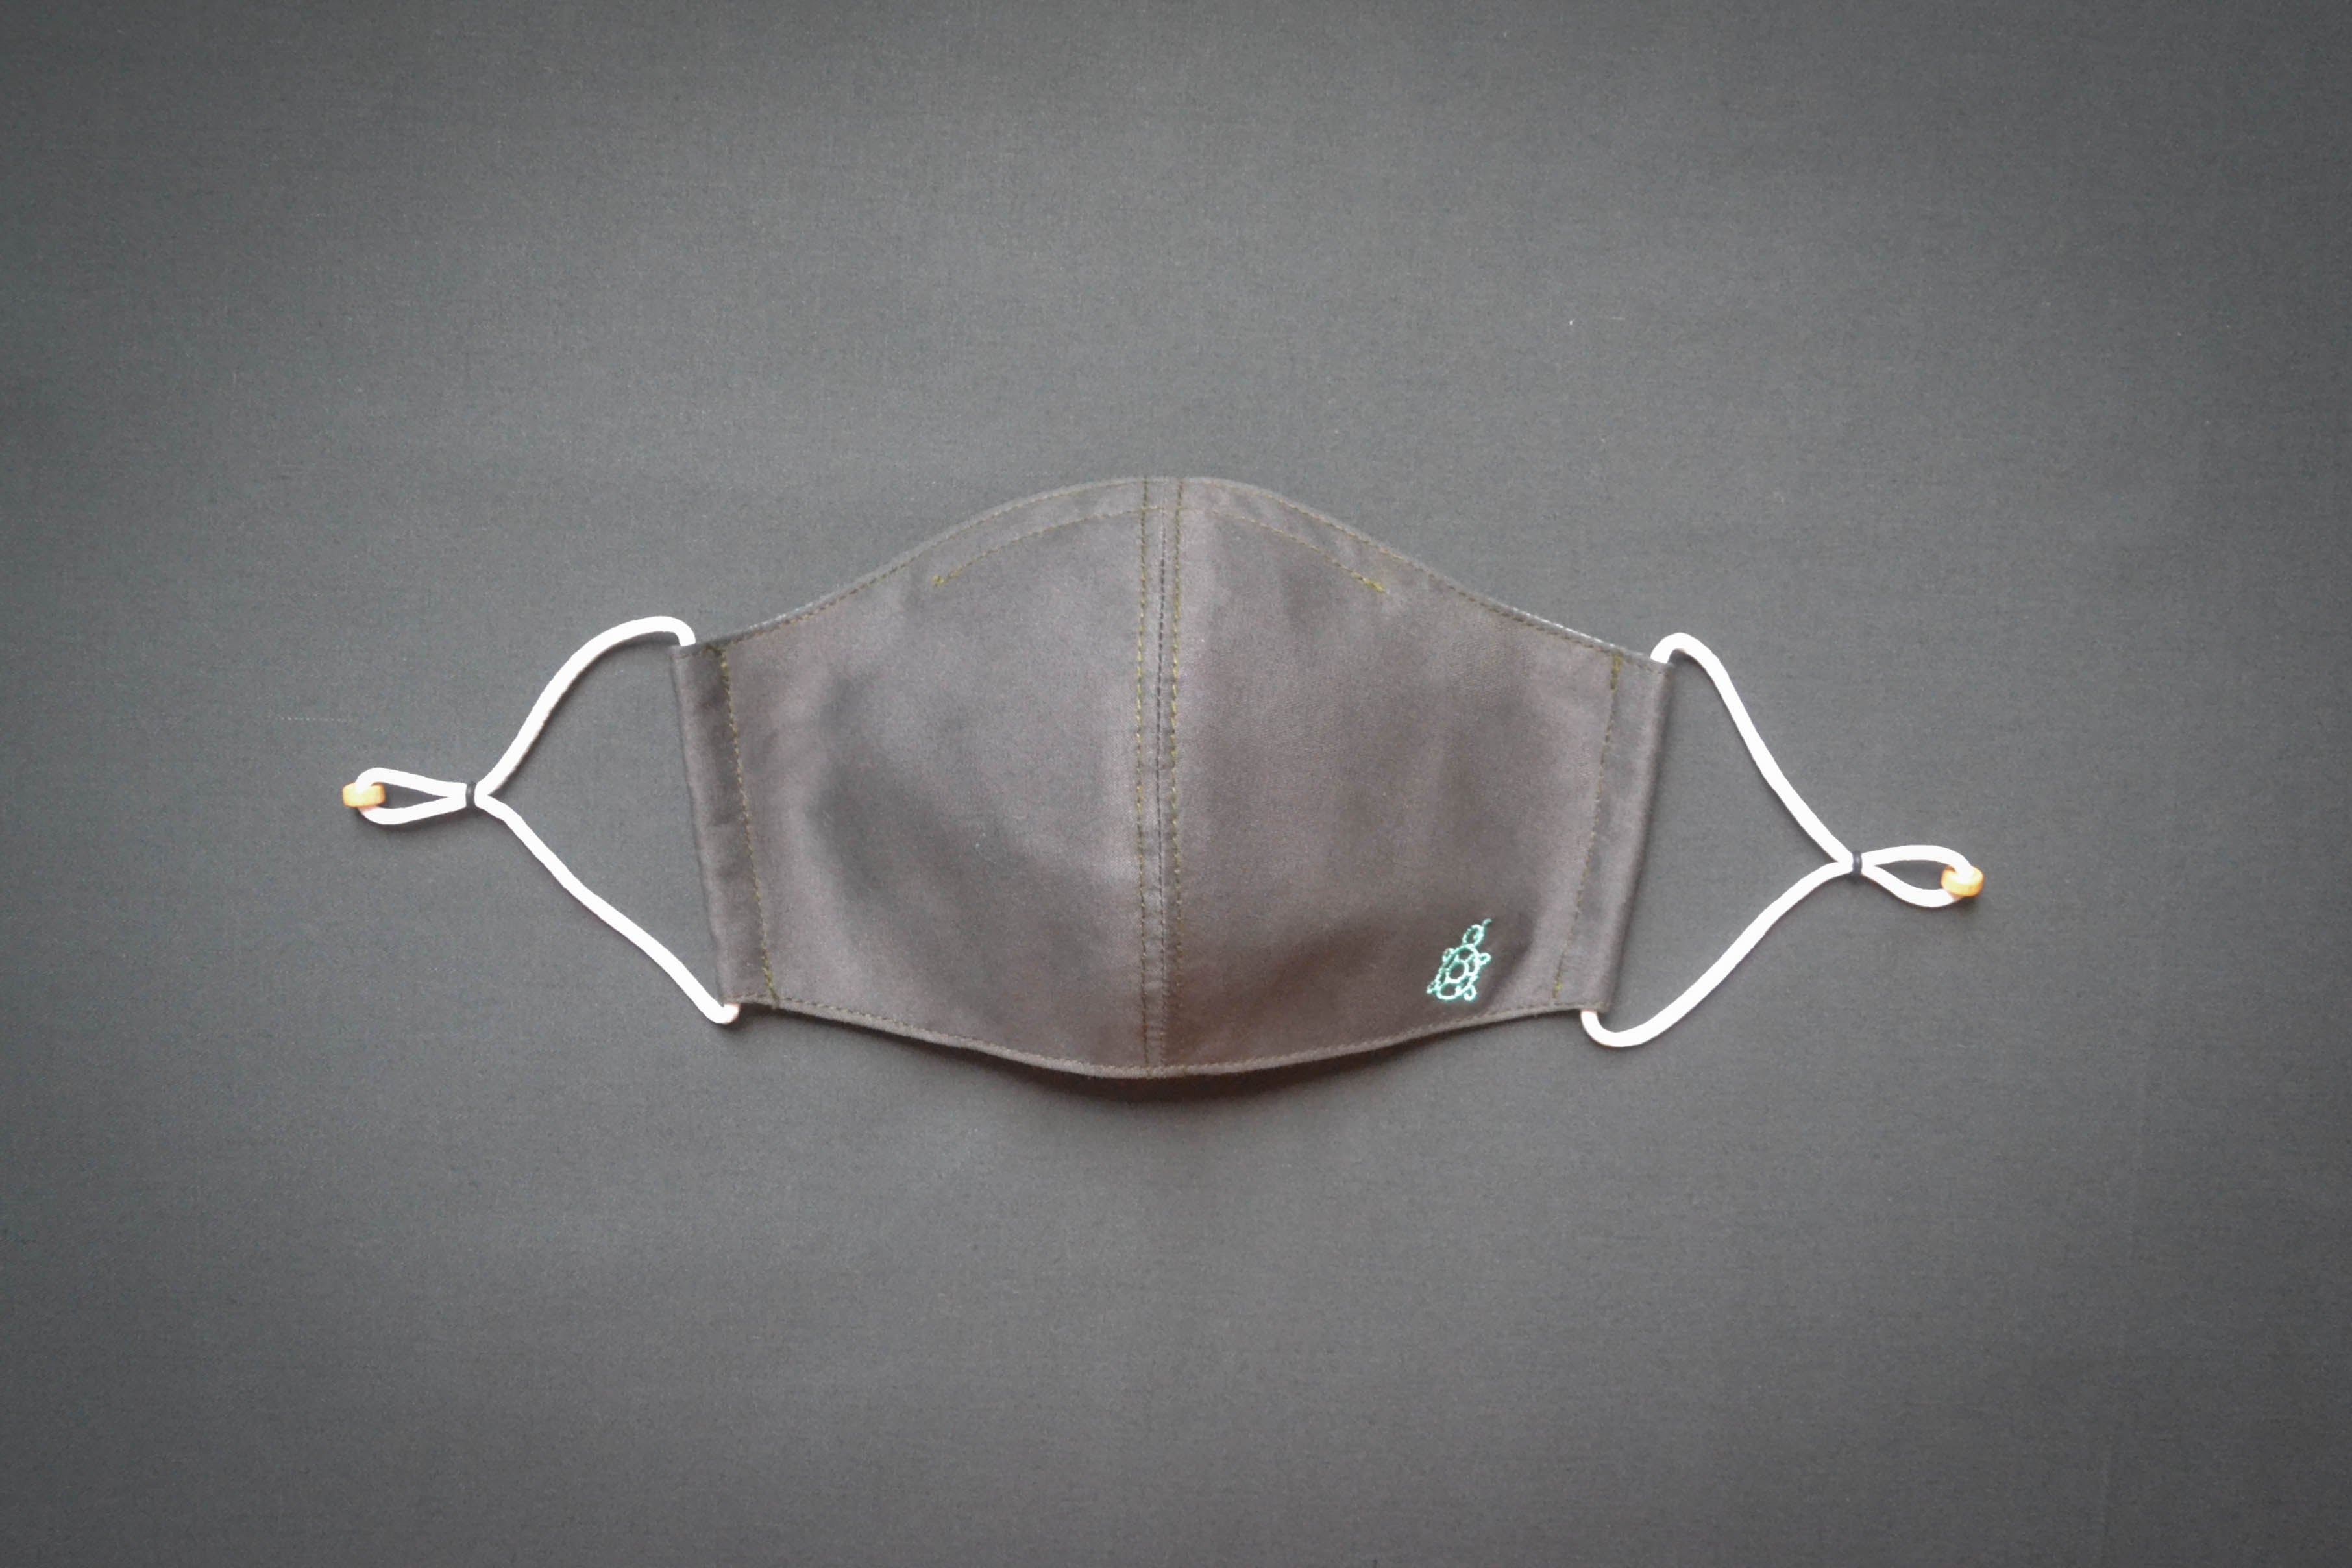 Turtle Mask 2.1 Beluga Grey- is made with 100% cotton fabric, which makes our masks very durable, sustainable and fully biodegradable.  The ear adjusters have been redesigned and are now more durable. In addition, the mask comes with a new inner sleeve to house a nose bridge wire for better fitment and comfort. Most importantly, Turtle Mask 2.1 is now machine washable when washed in a delicates laundry bag with cold water.